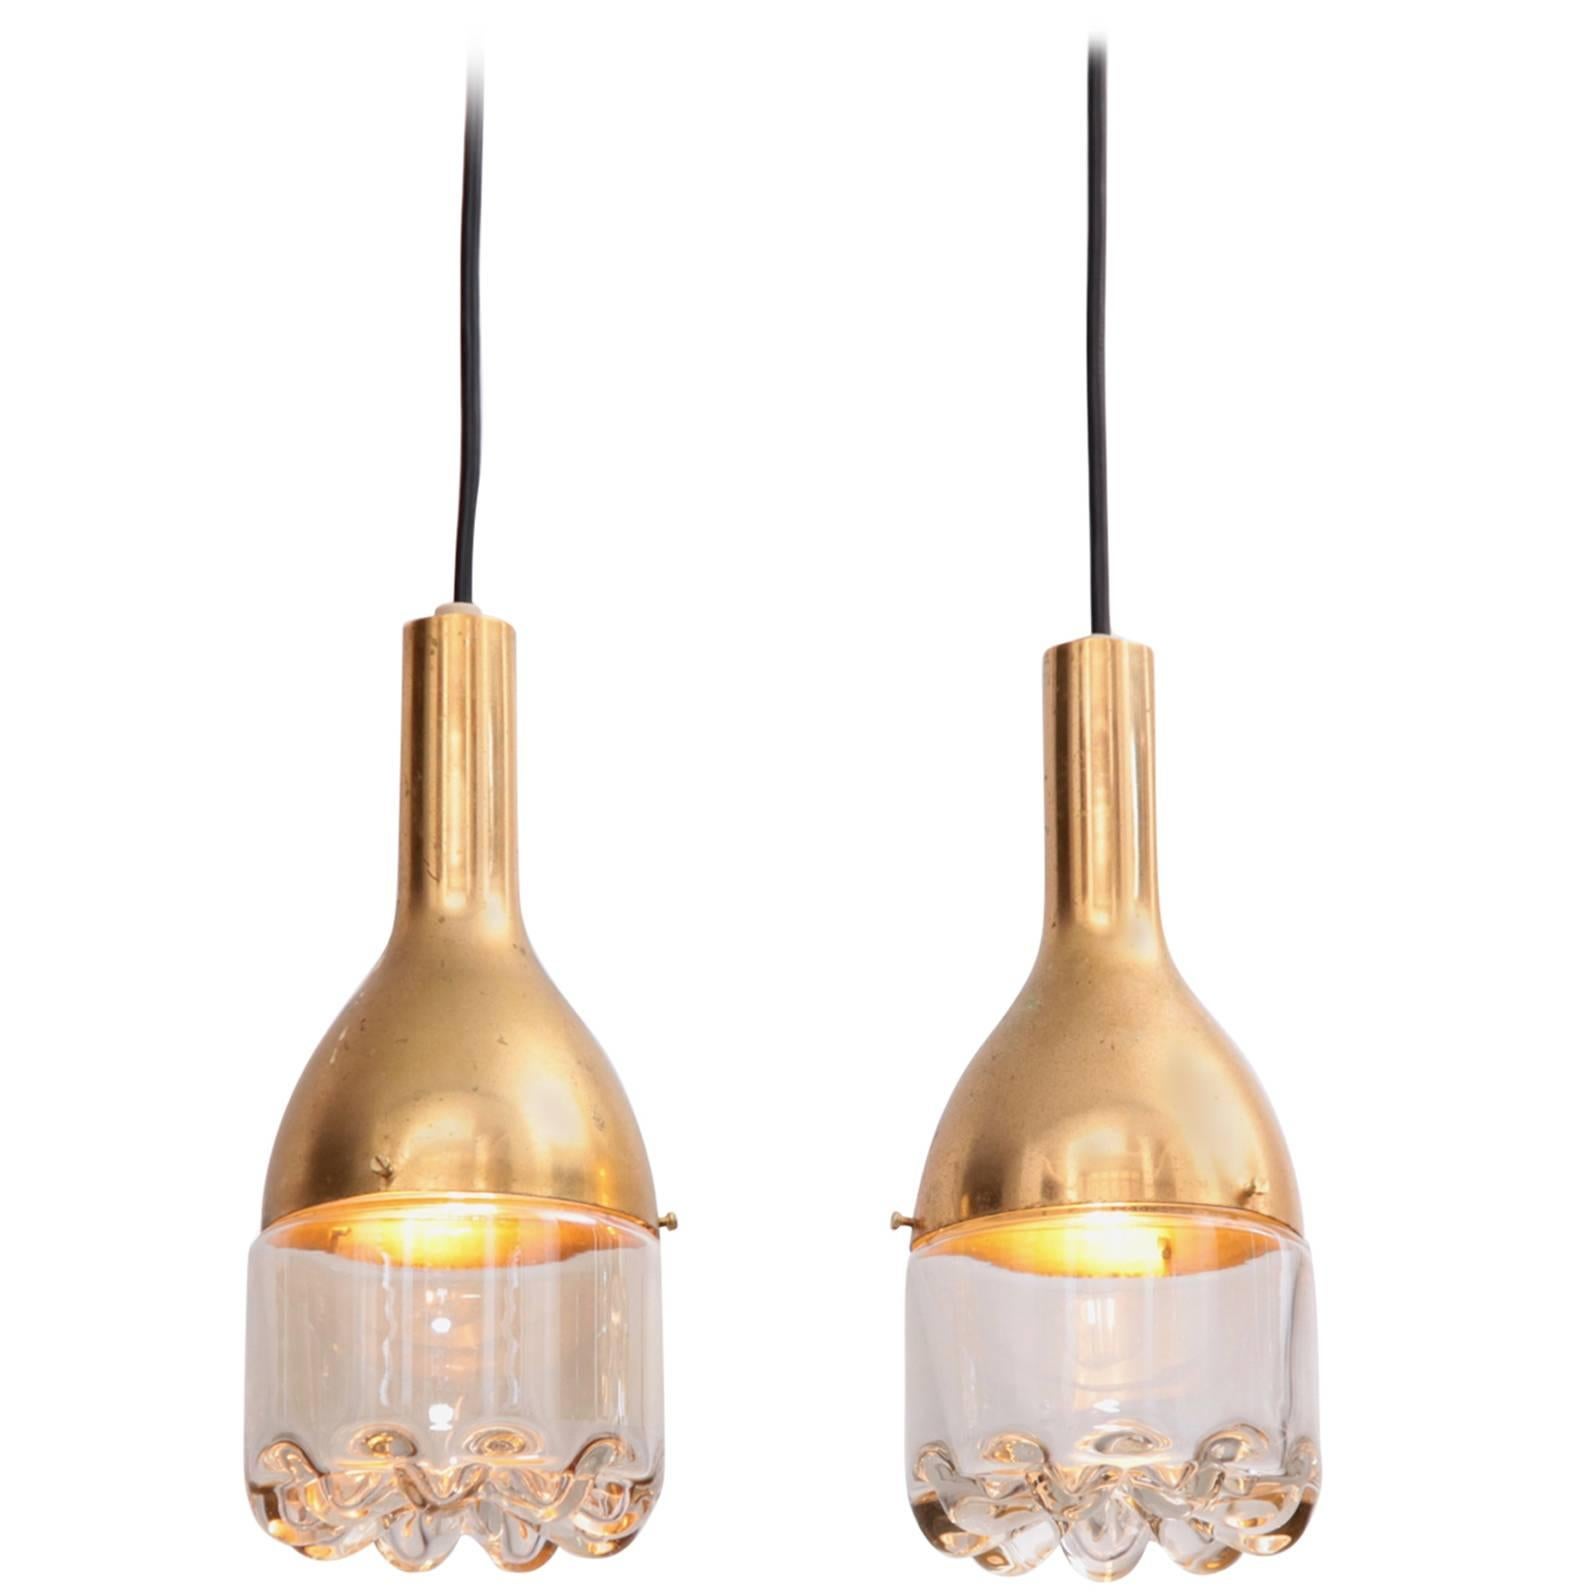 One 1960s Pendant Lamp in Brass and Glass